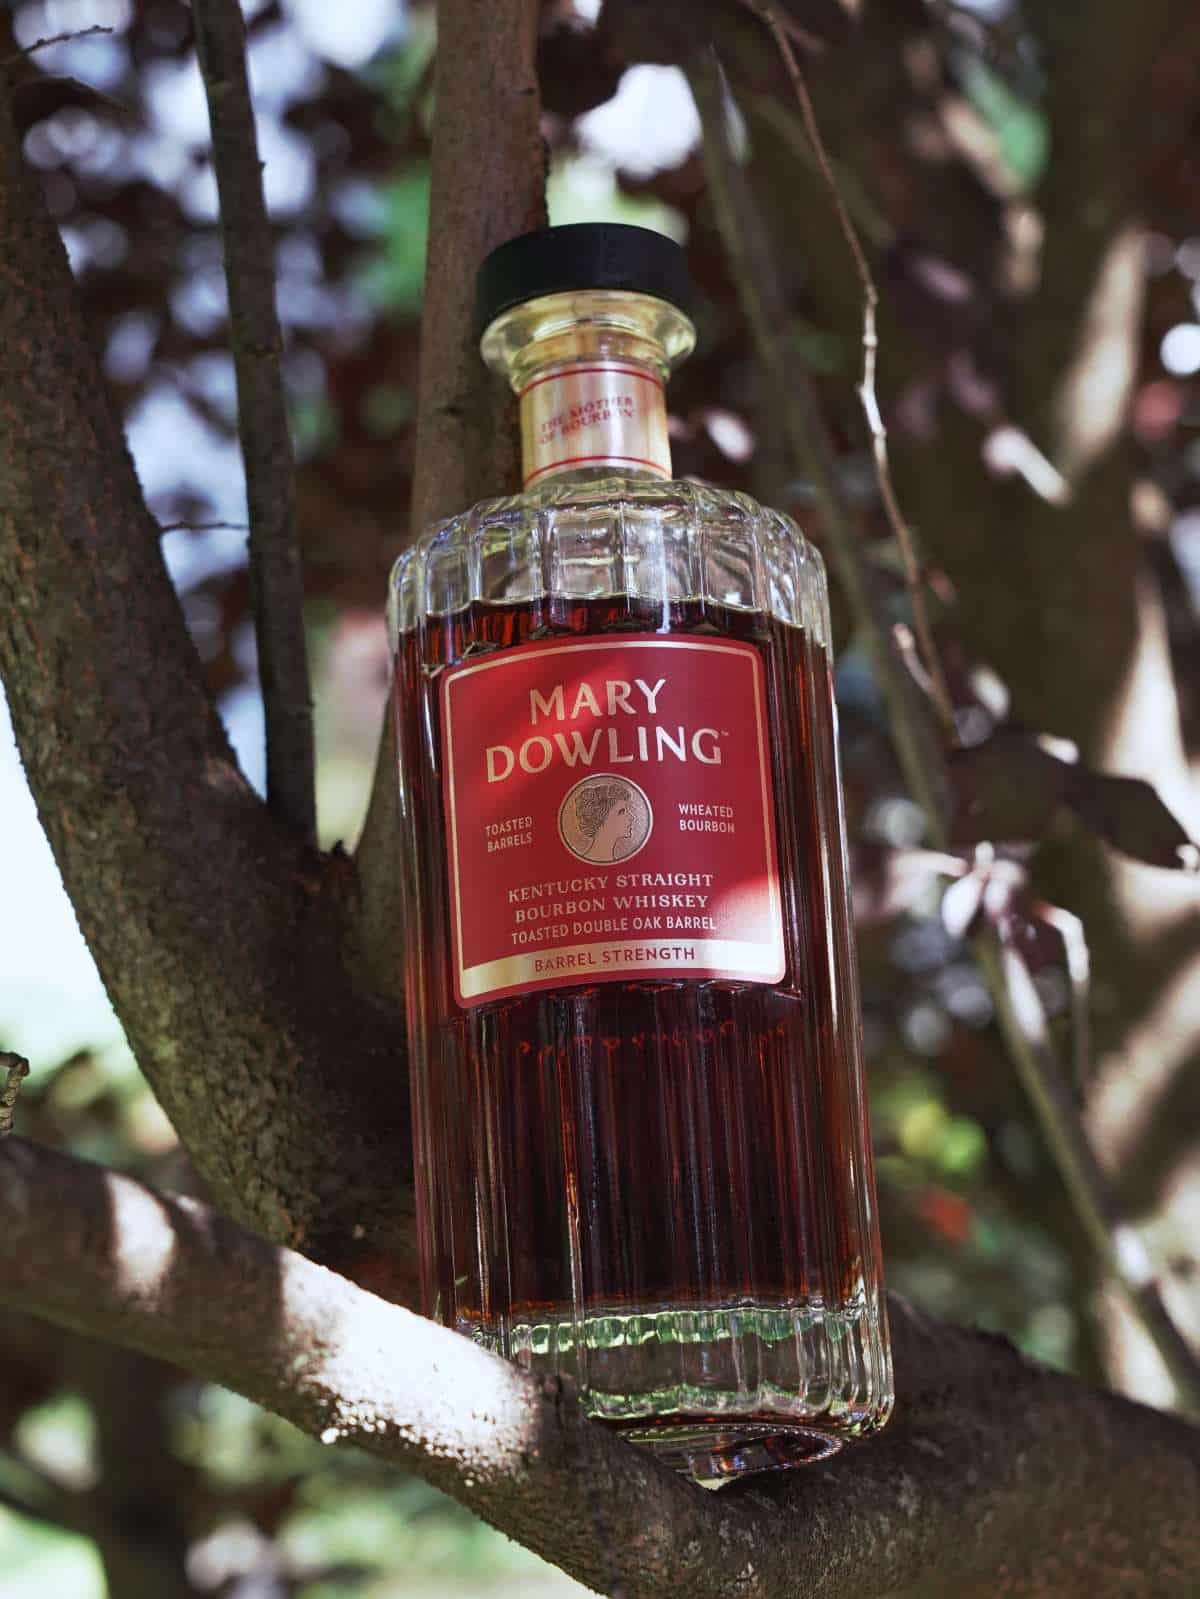 Mary Dowling Double Oak Barrel Strength Bourbon featured